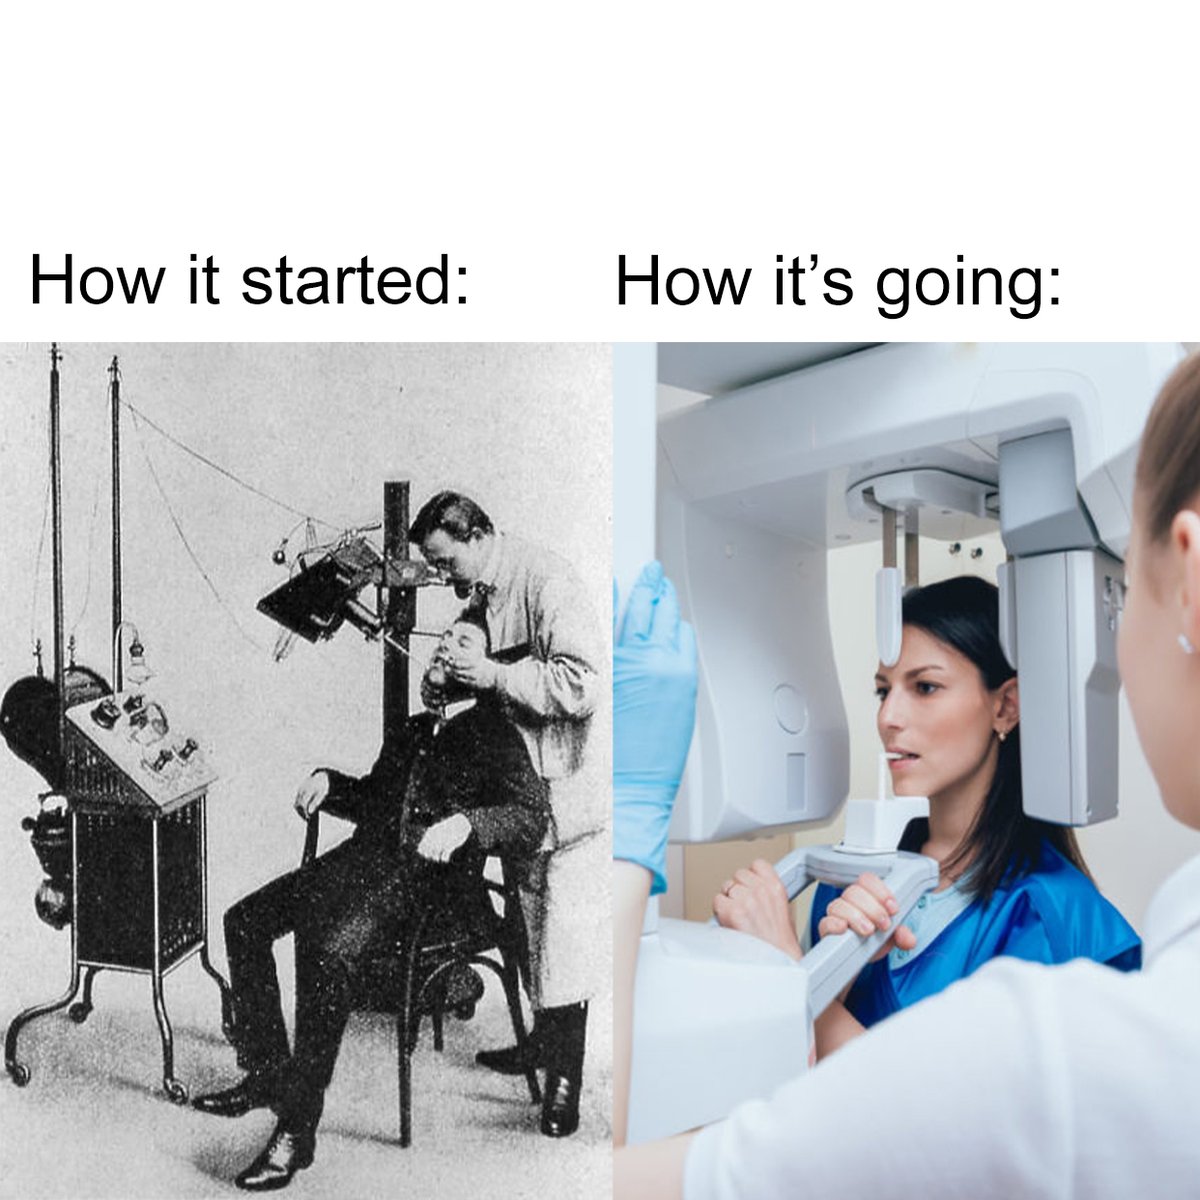 HOW IT STARTED vs. How it's going! We love to see the progress made!! #DentalXRays #ThenAndNow #HowItStartedVsHowItsGoing #dentistryisfun #dentaladvancements #dentaltechnology #painfreedentistry #comfortabledentistry